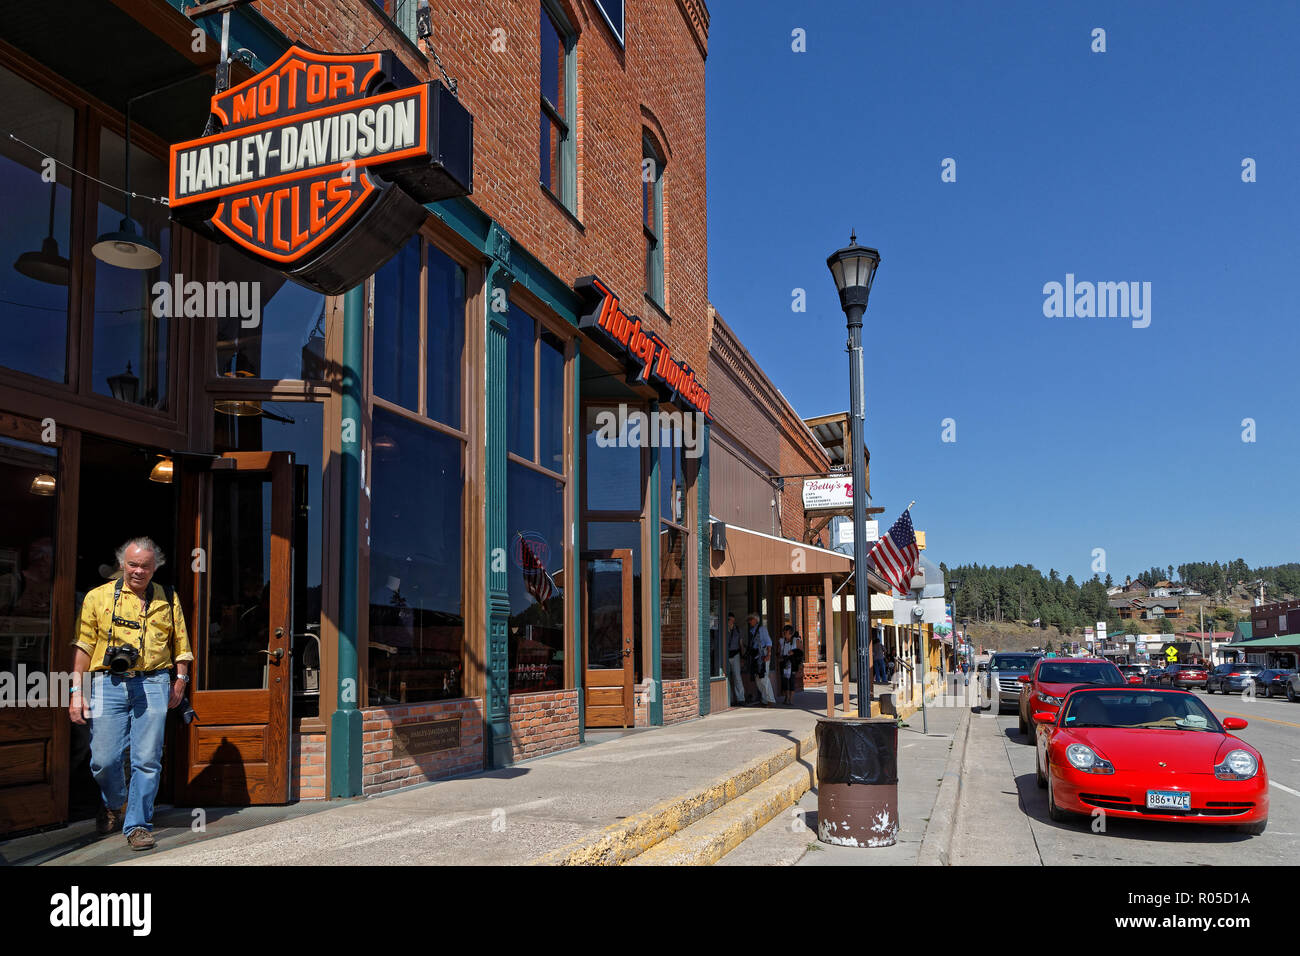 HILL CITY, SOUTH DAKOTA, September 16, 2018 : Shop signs and stores in Main Street, Hill City. Hill City is known as the 'Heart of the Hills' which is Stock Photo